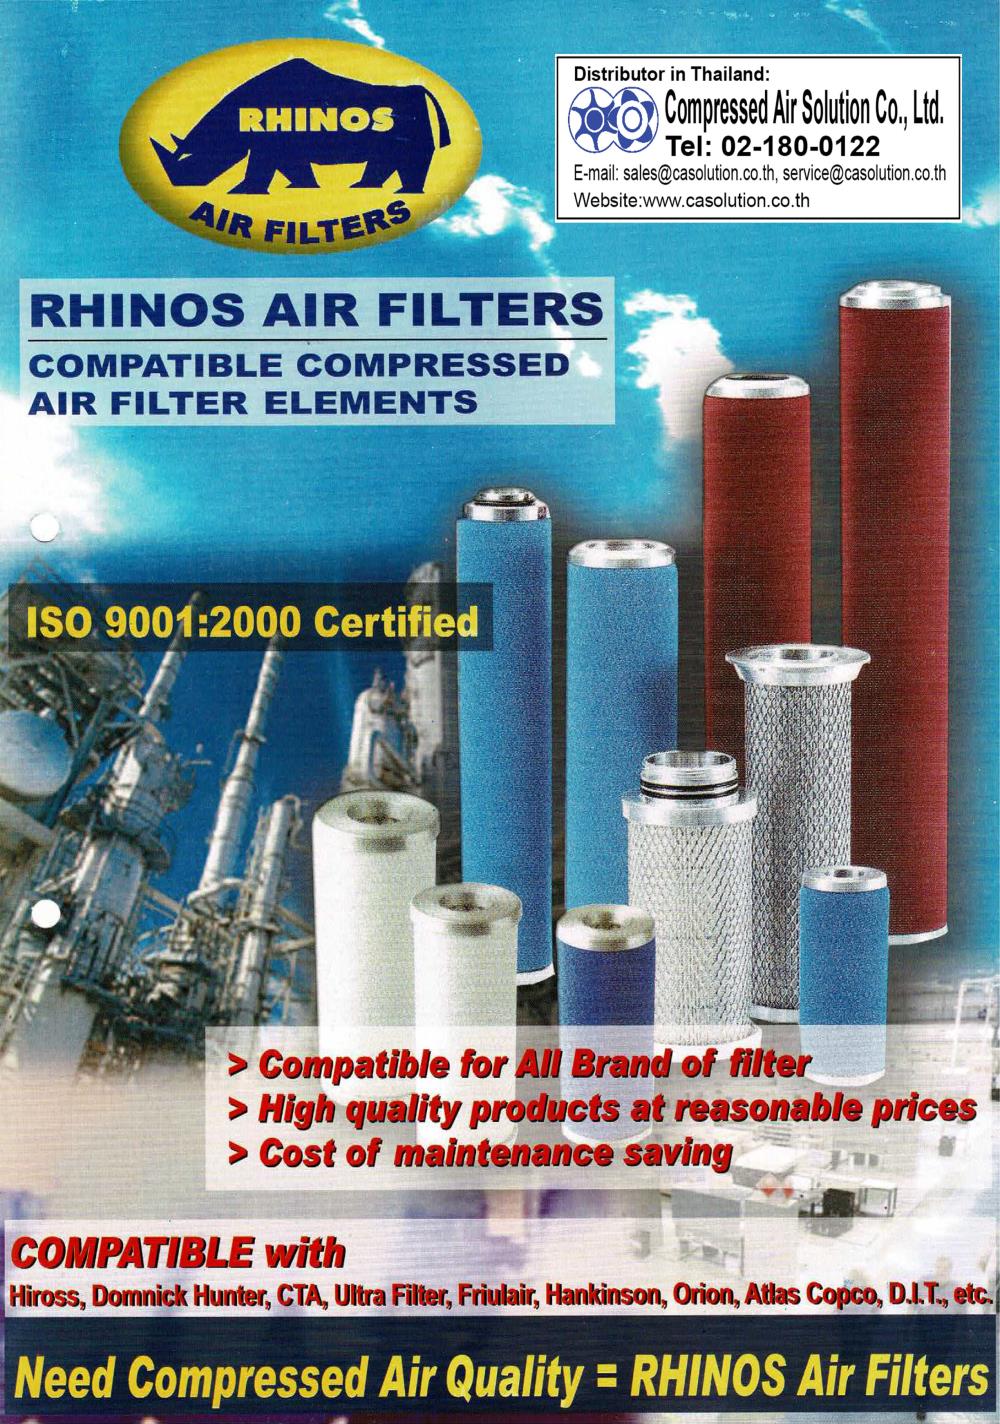 RHINOS Compatible Compressed Air Filter Elements